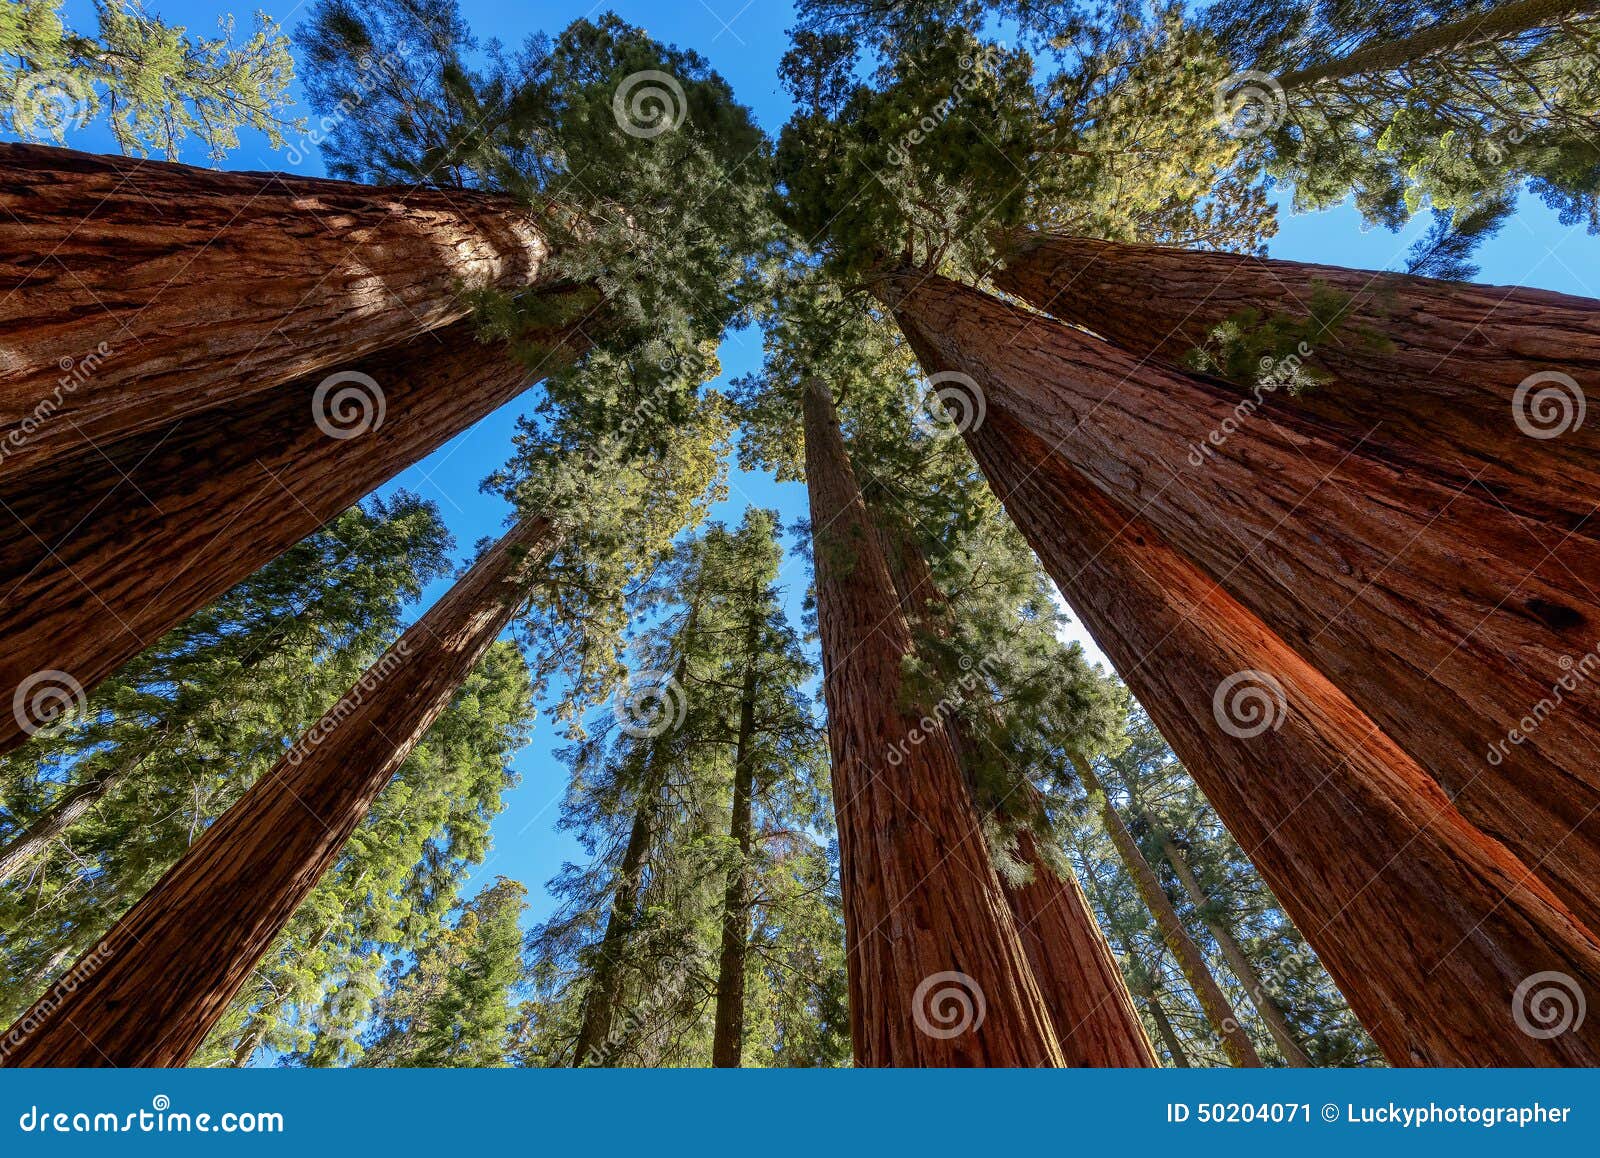 giant sequoia trees in sequoia national park